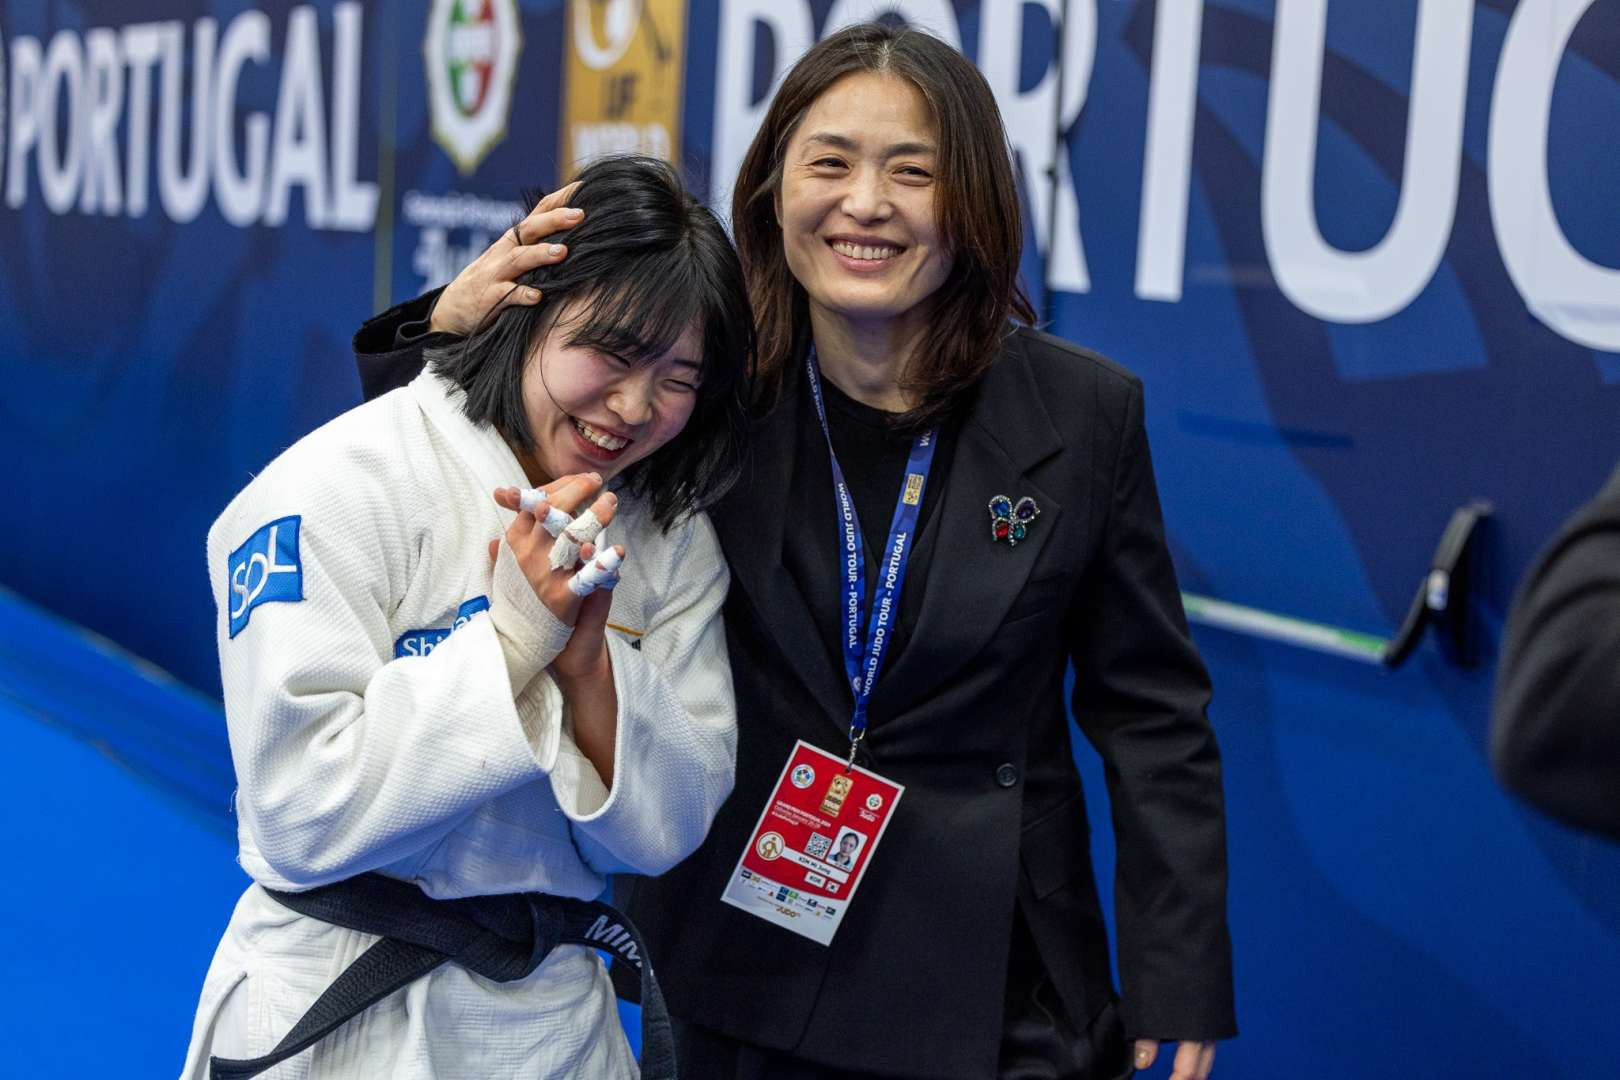 Asian judokas dominate first day of Portugal Grand Prix